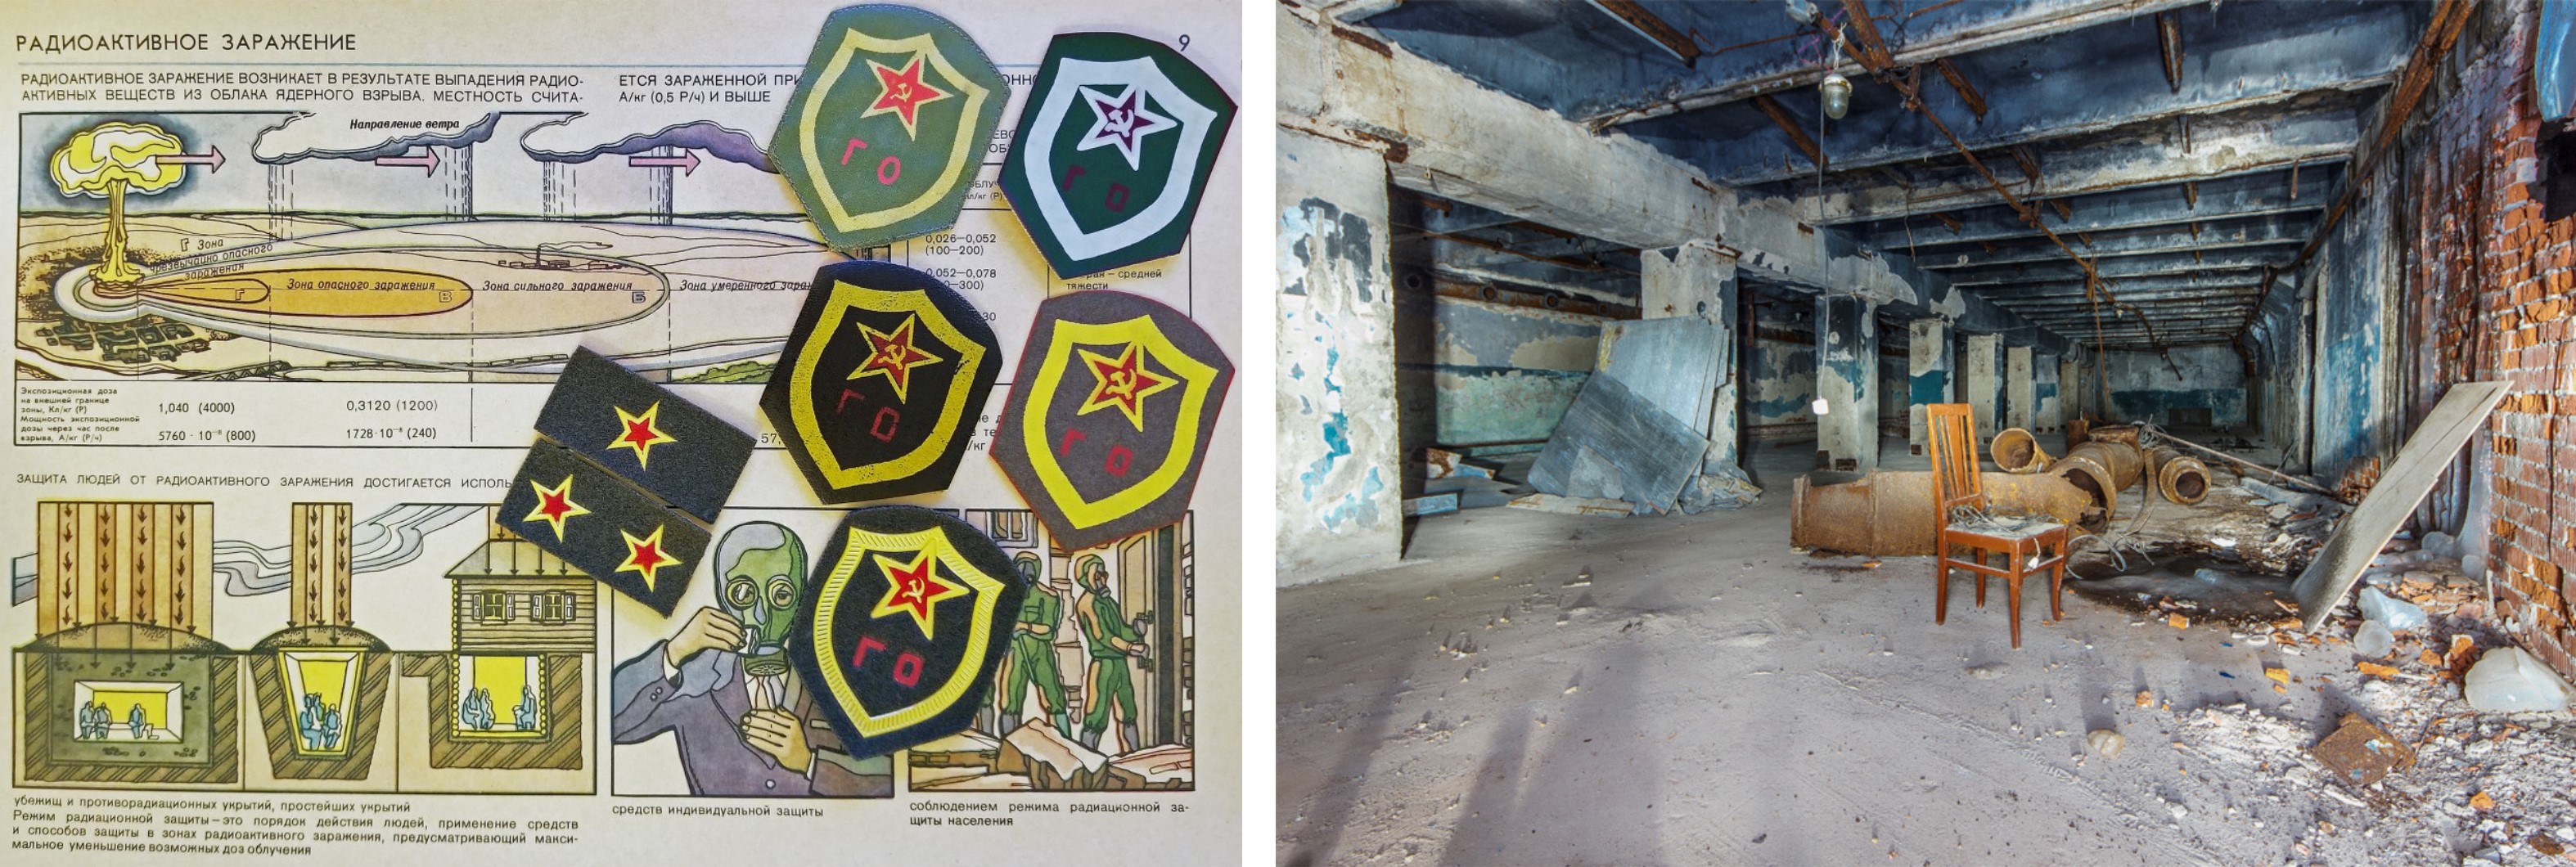 On the left, Soviet era poster and civil defense patches. On the right, the interior of an abandoned Soviet bomb bunker.